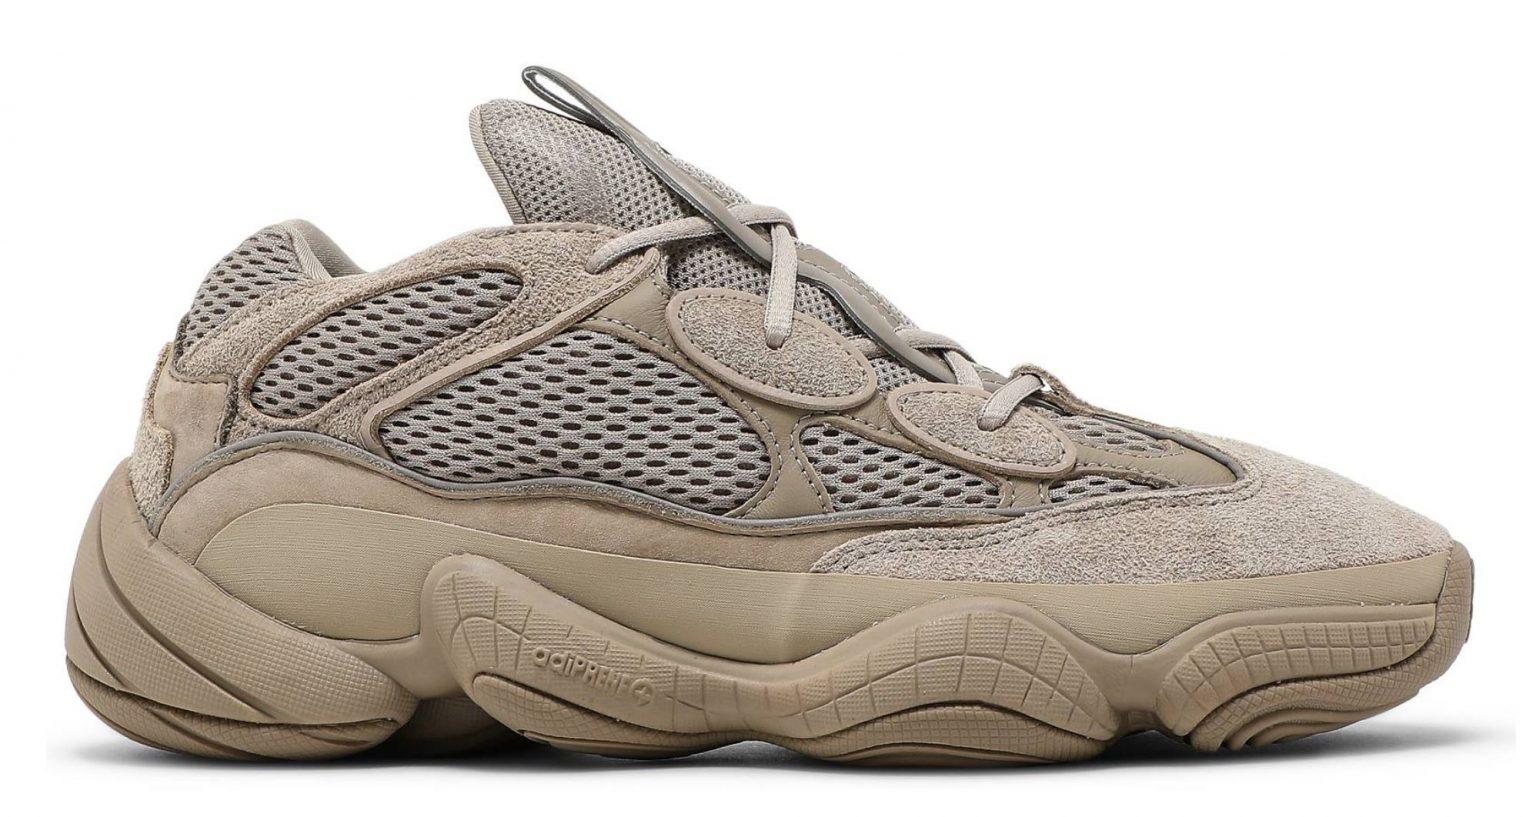 Adidas Yeezy 500 Size Chart and Fitting - Size-Charts.com